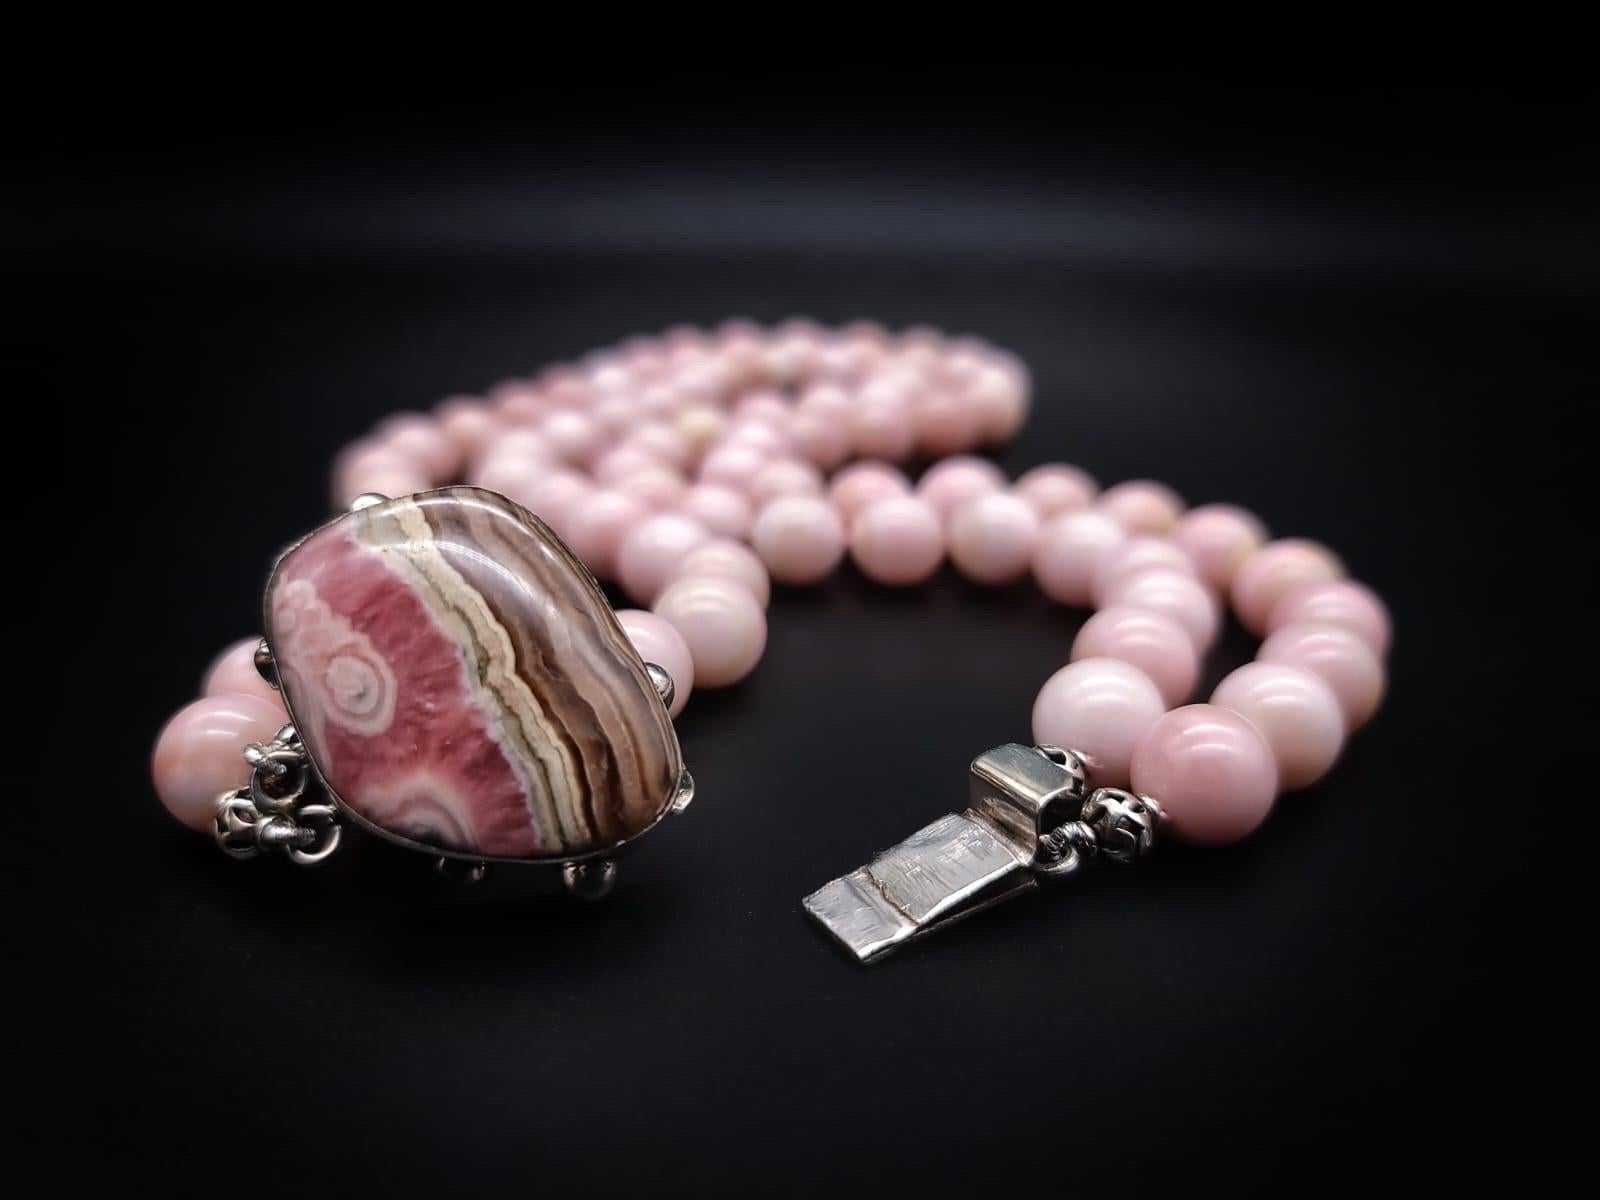 One-of-a-Kind

Unusual Pink Onyx  2 strands of matched 12m.m beads. Flattering soft pink beads with gentle banding individually knotted surround a specimen of Rhodochrosite polished stone set in Sterling silver clasp.

Pink onyx can be used by